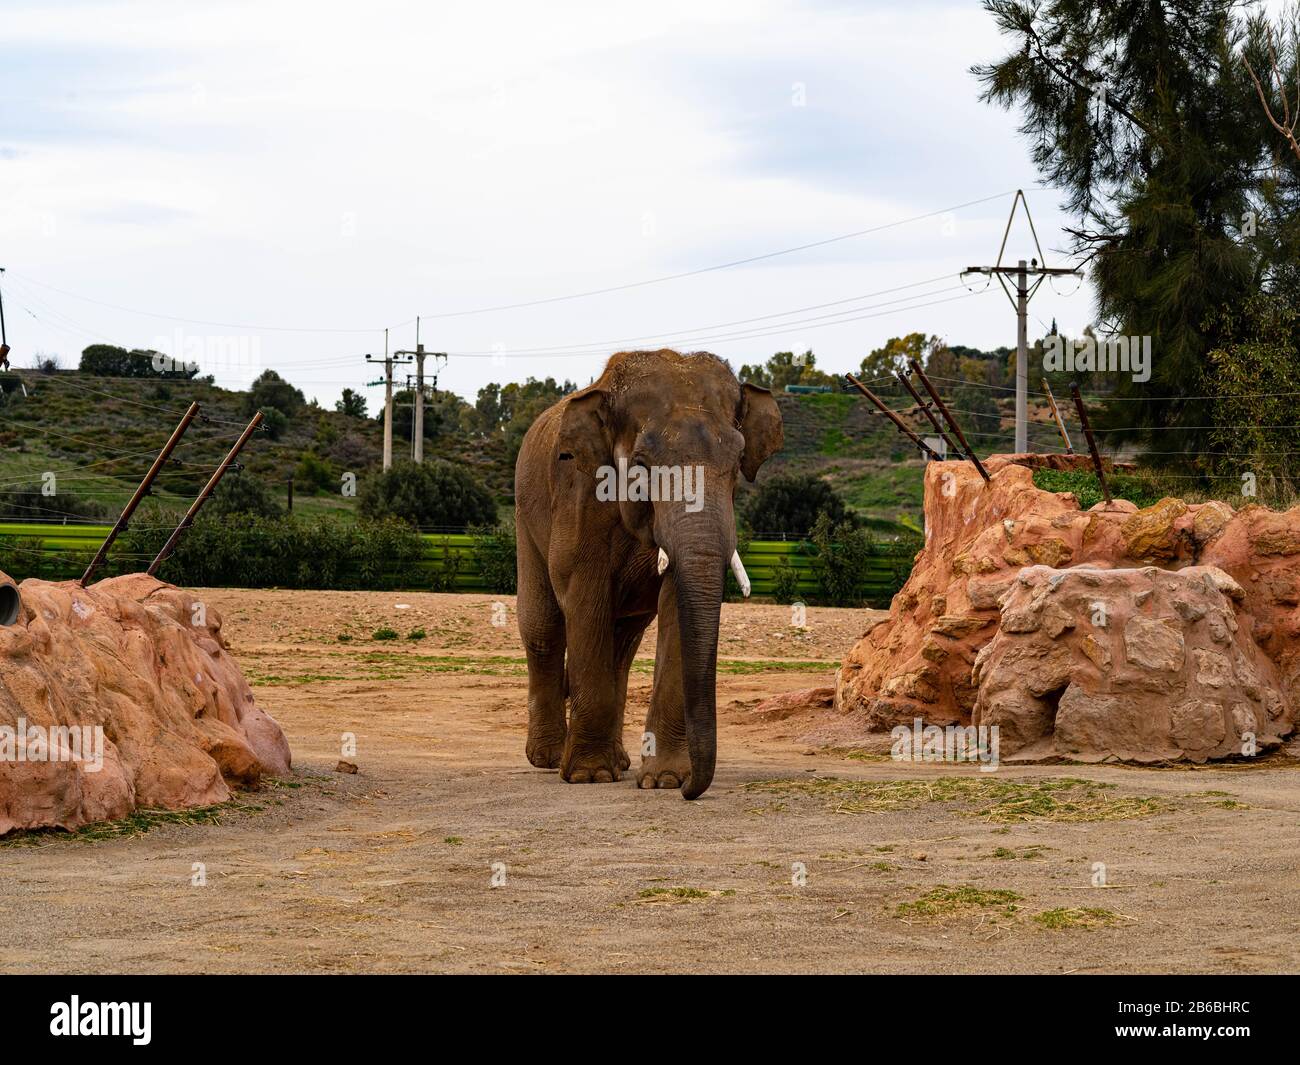 Athens, Greece, March 2nd 2020: A Large Elephant With Small Tusks Walks Towards the Viewer Stock Photo